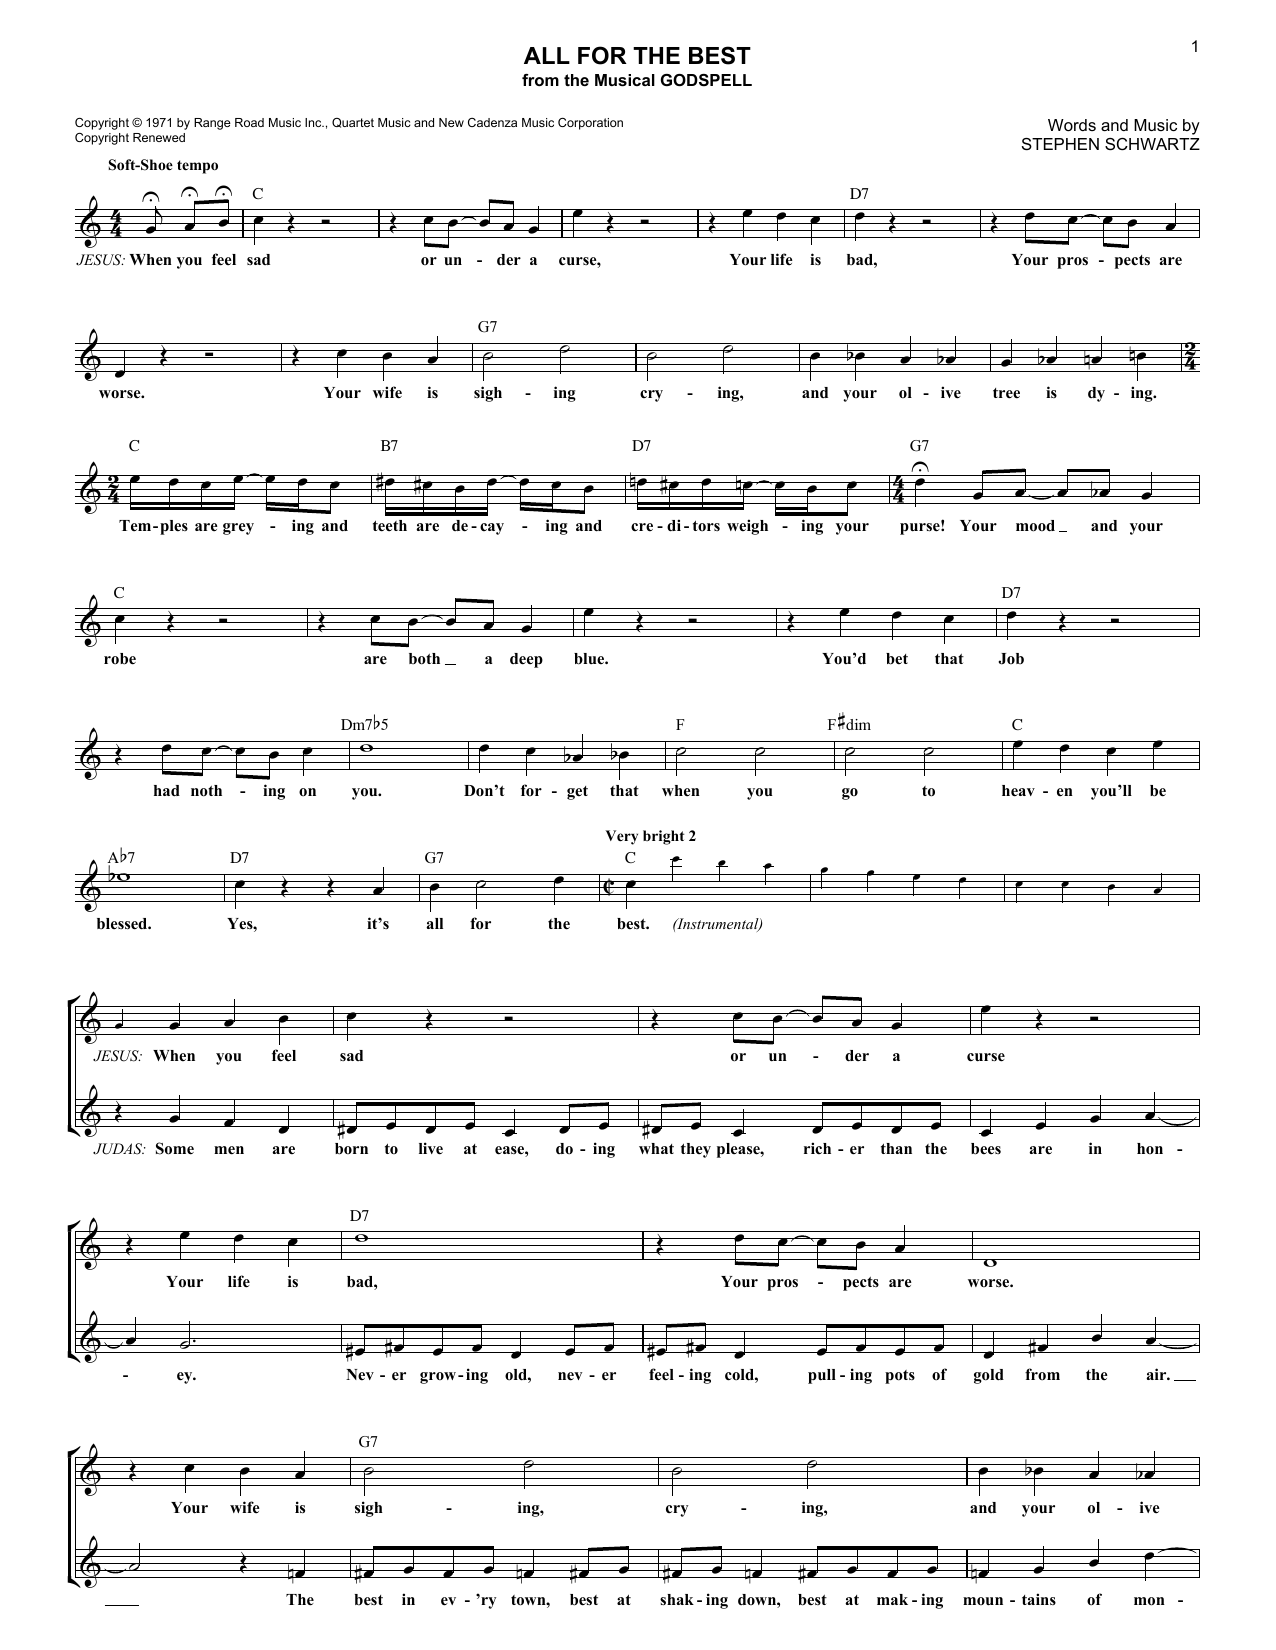 Stephen Schwartz All For The Best sheet music notes and chords. Download Printable PDF.